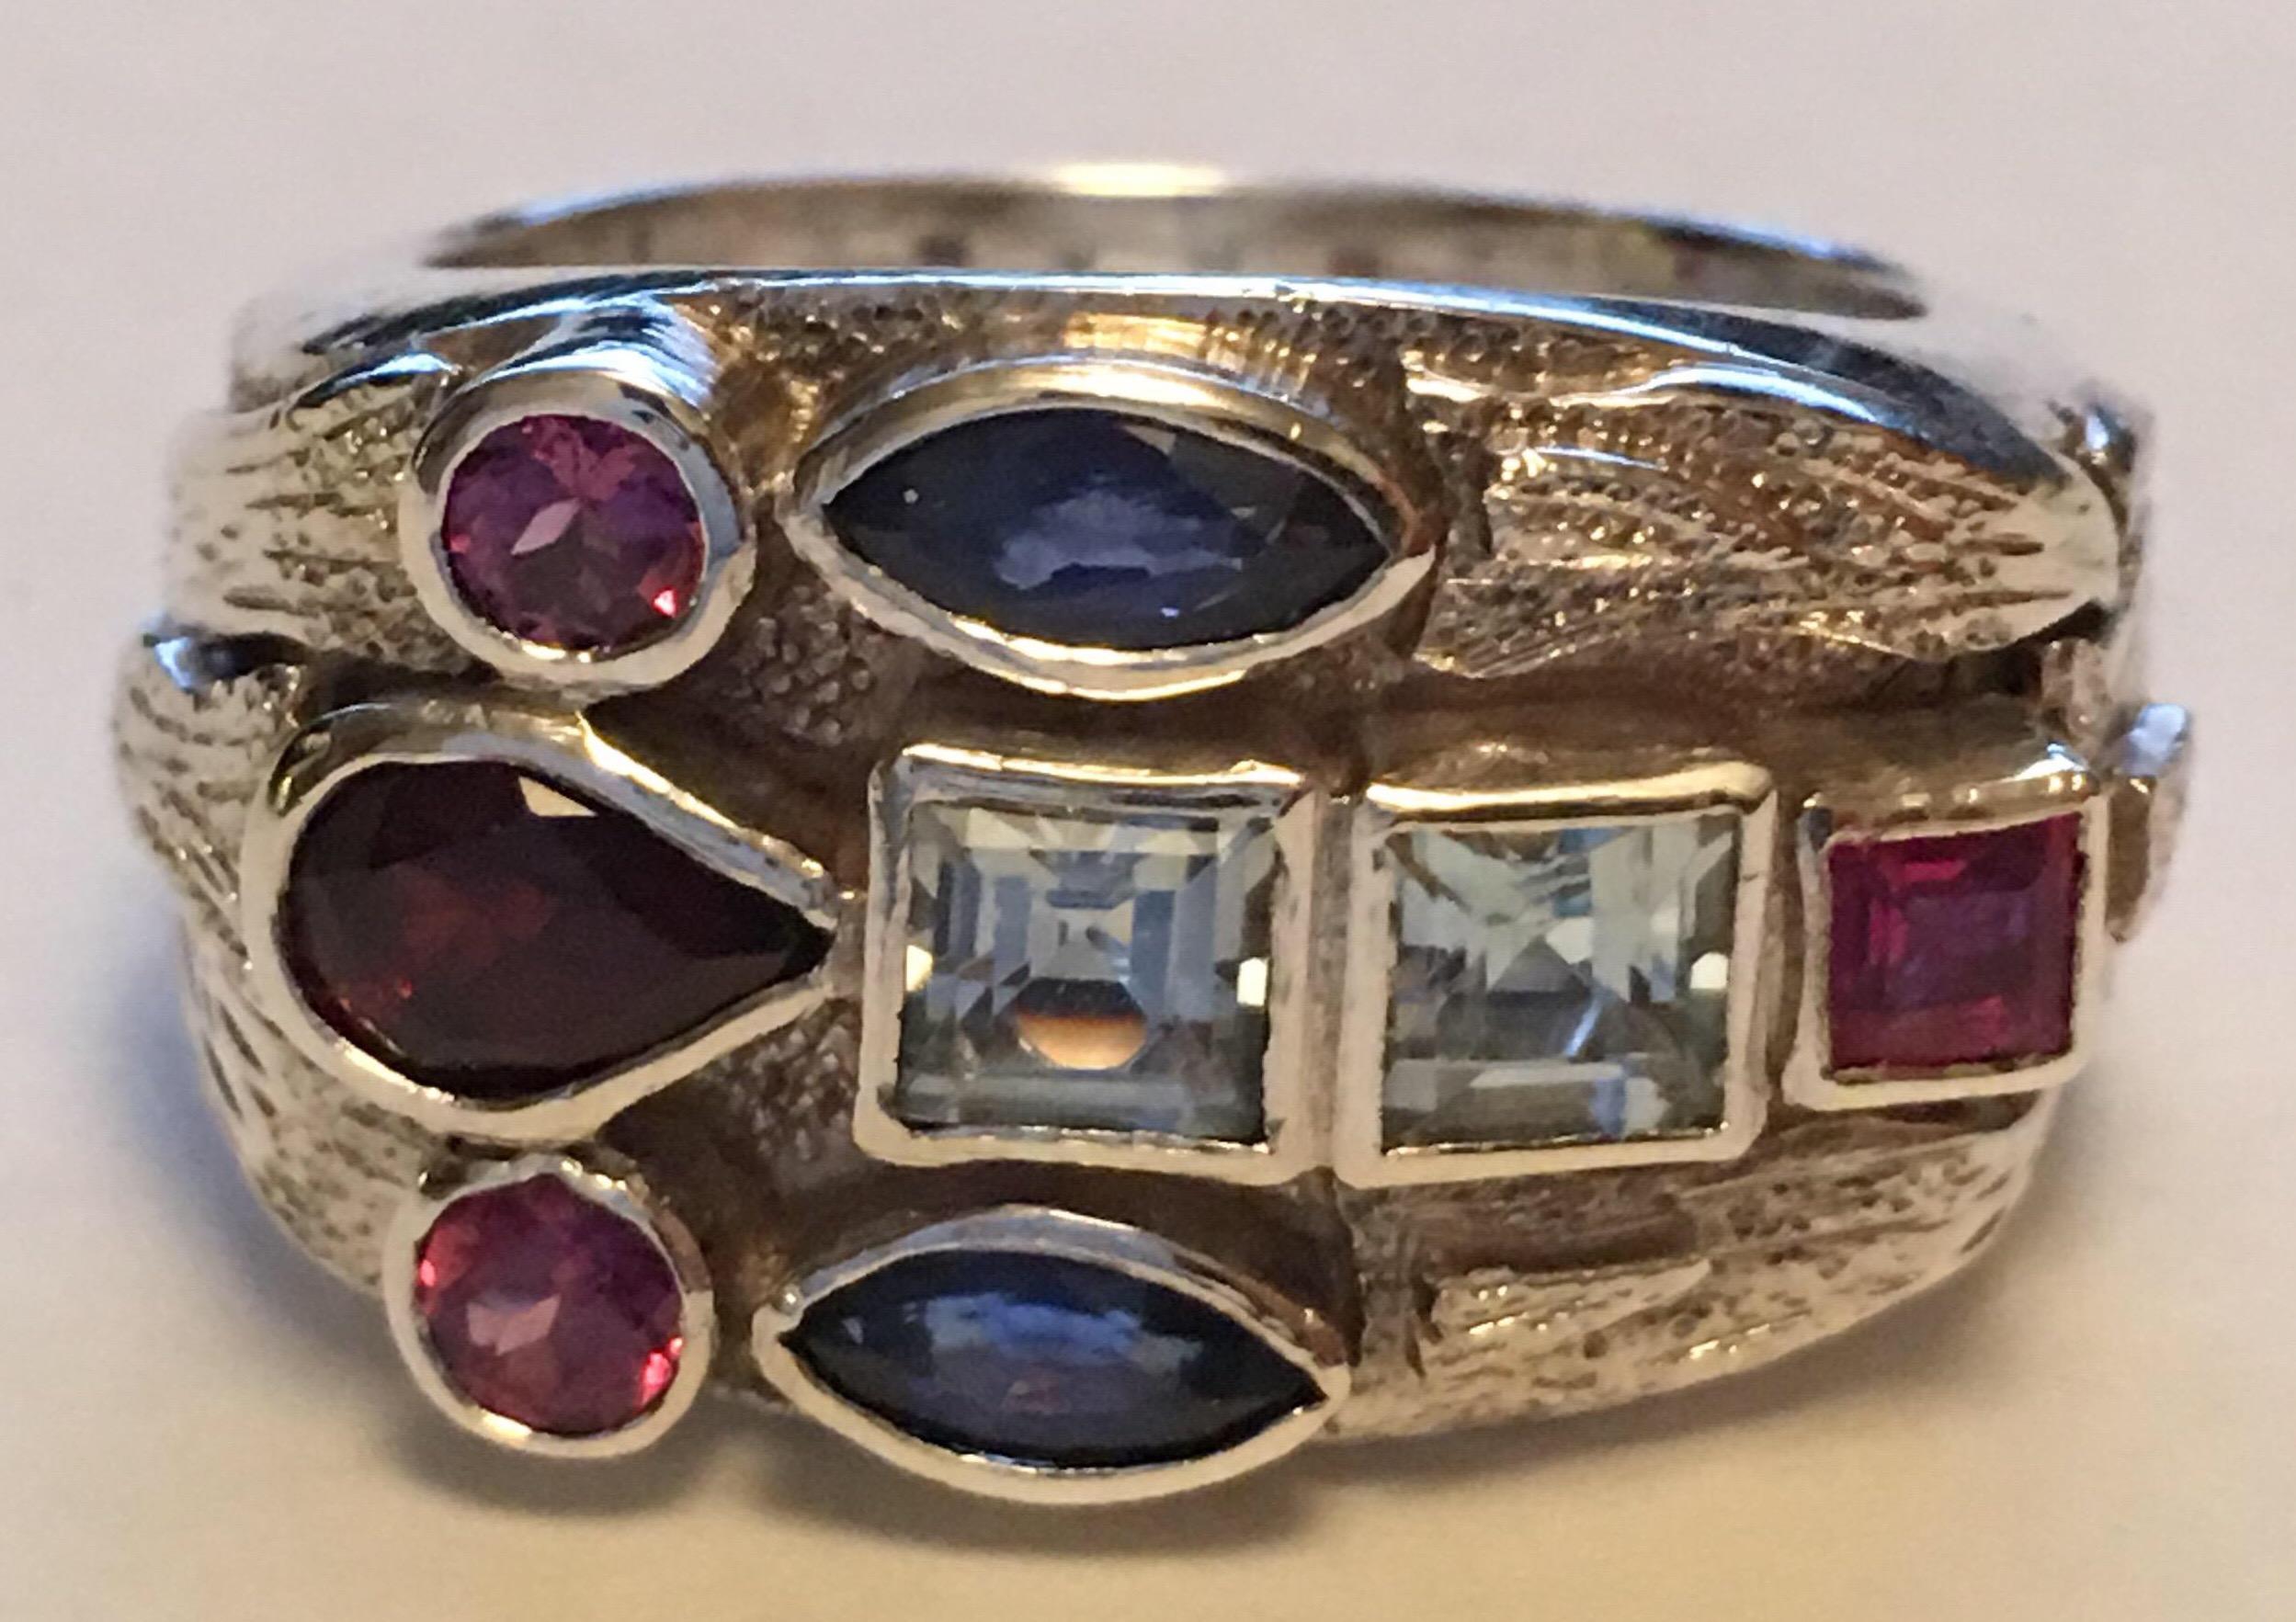 Marquise Blue sapphire, Square ruby, Round Tourmaline, square aquamarine and Pears shape Garnet set in sterling silver.
One of a kind hand crafted ring.
All the stones are natural , hand cut and polished.
Size of the ring is 8 but can be